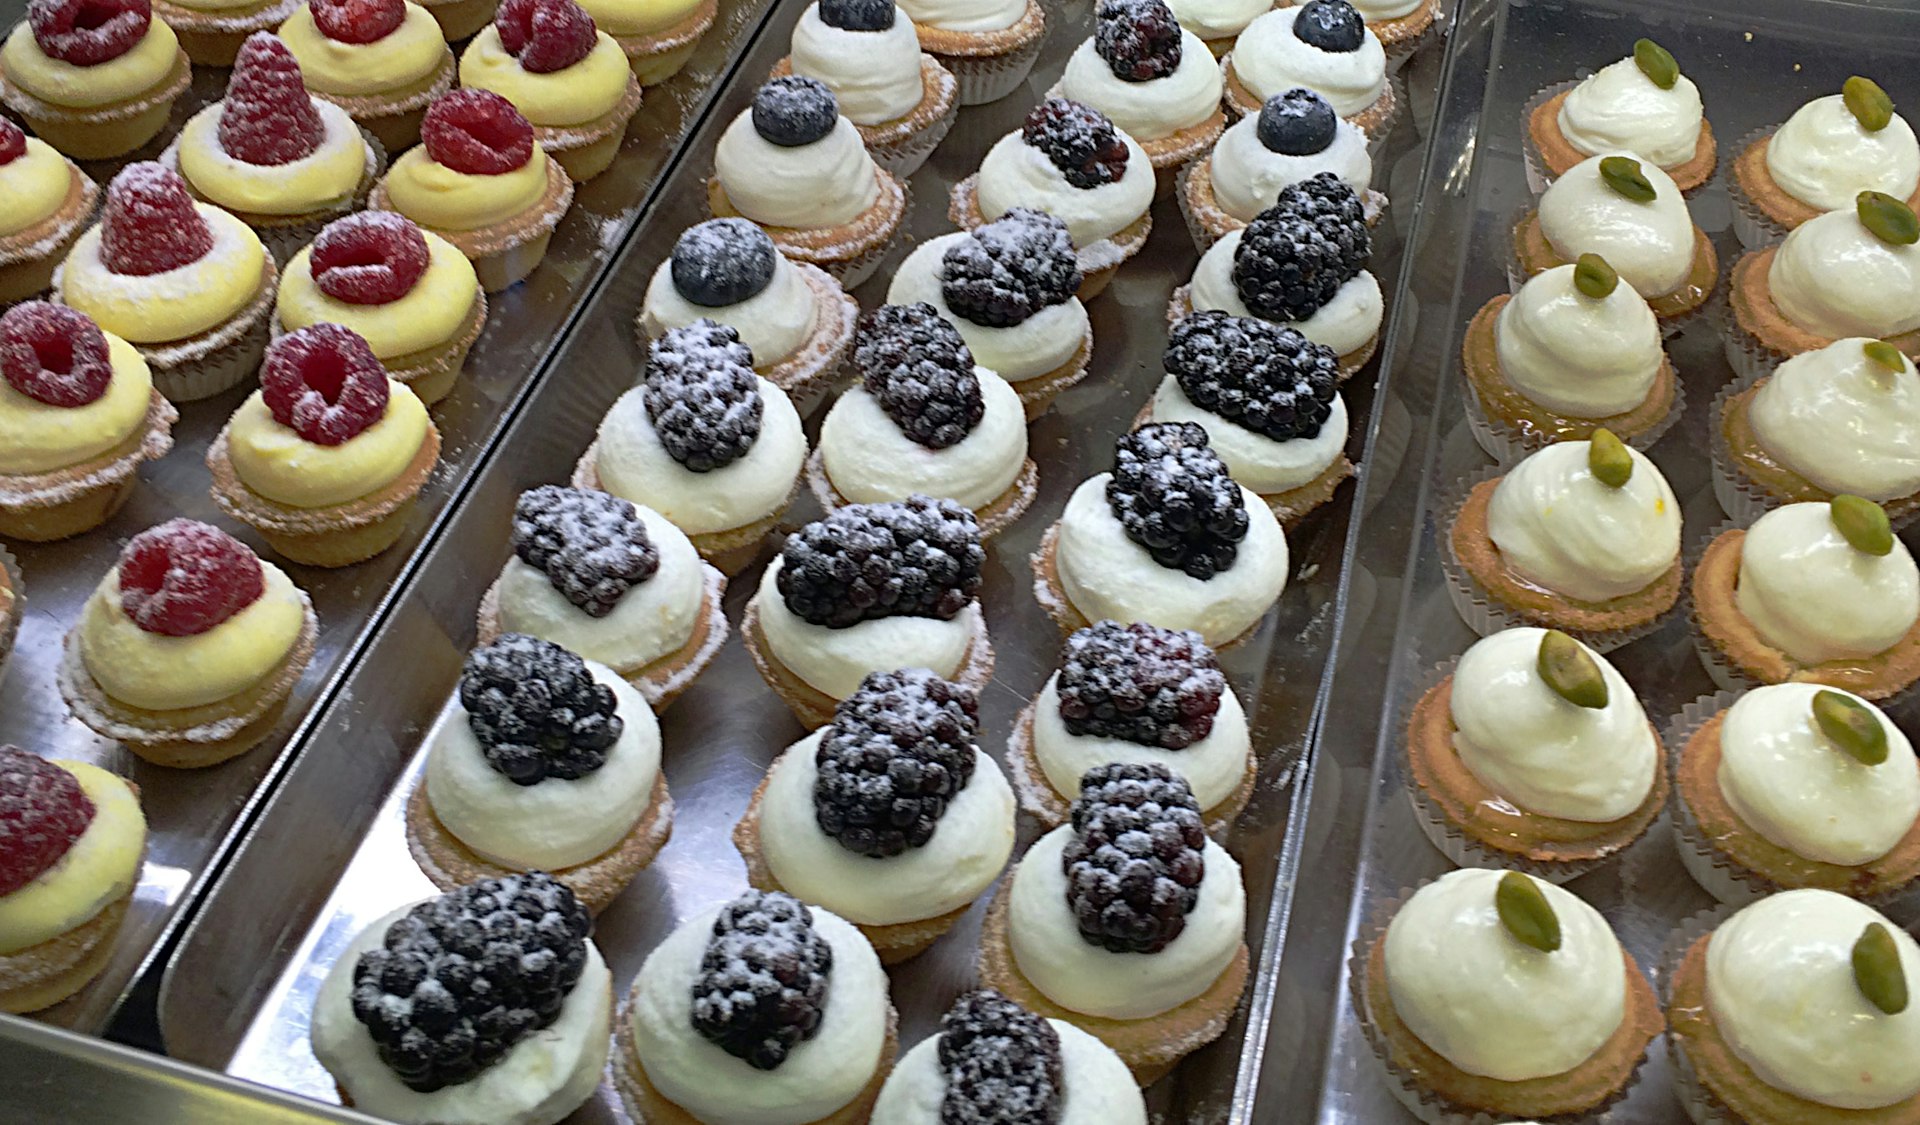 Pasticcini (small sweet tartlets) are one of the house specialities at Gelateria Pasticceria Badiani. Image by Virginia Maxwell / Lonely Planet